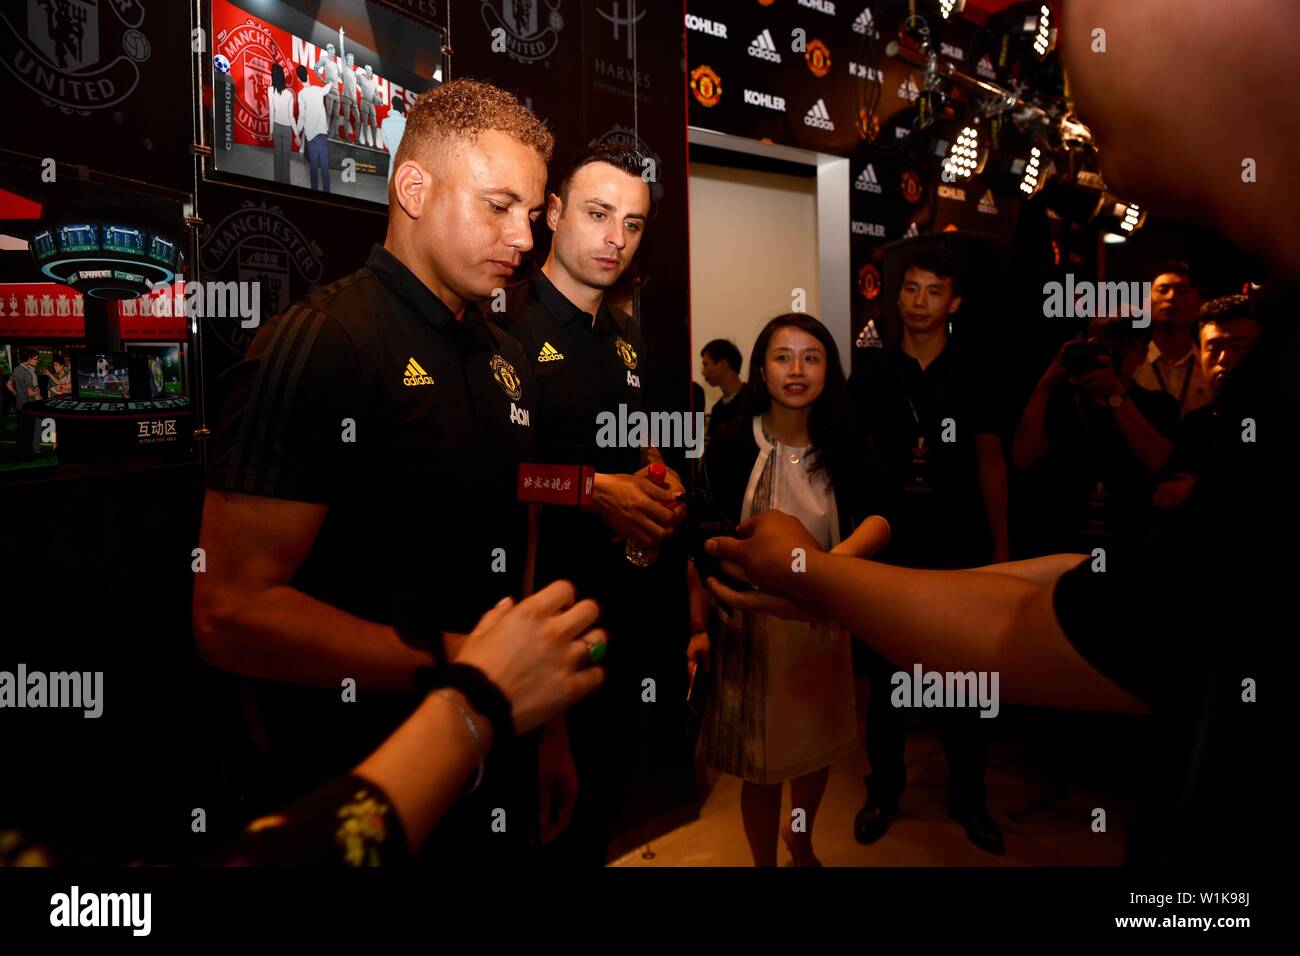 English football player Wes Brown, left, and Bulgarian football player Dimitar Berbatov attend a promotional event at the first club-themed entertainment and experience center launched by Manchester United in Beijing, China, 3 July 2019. Stock Photo